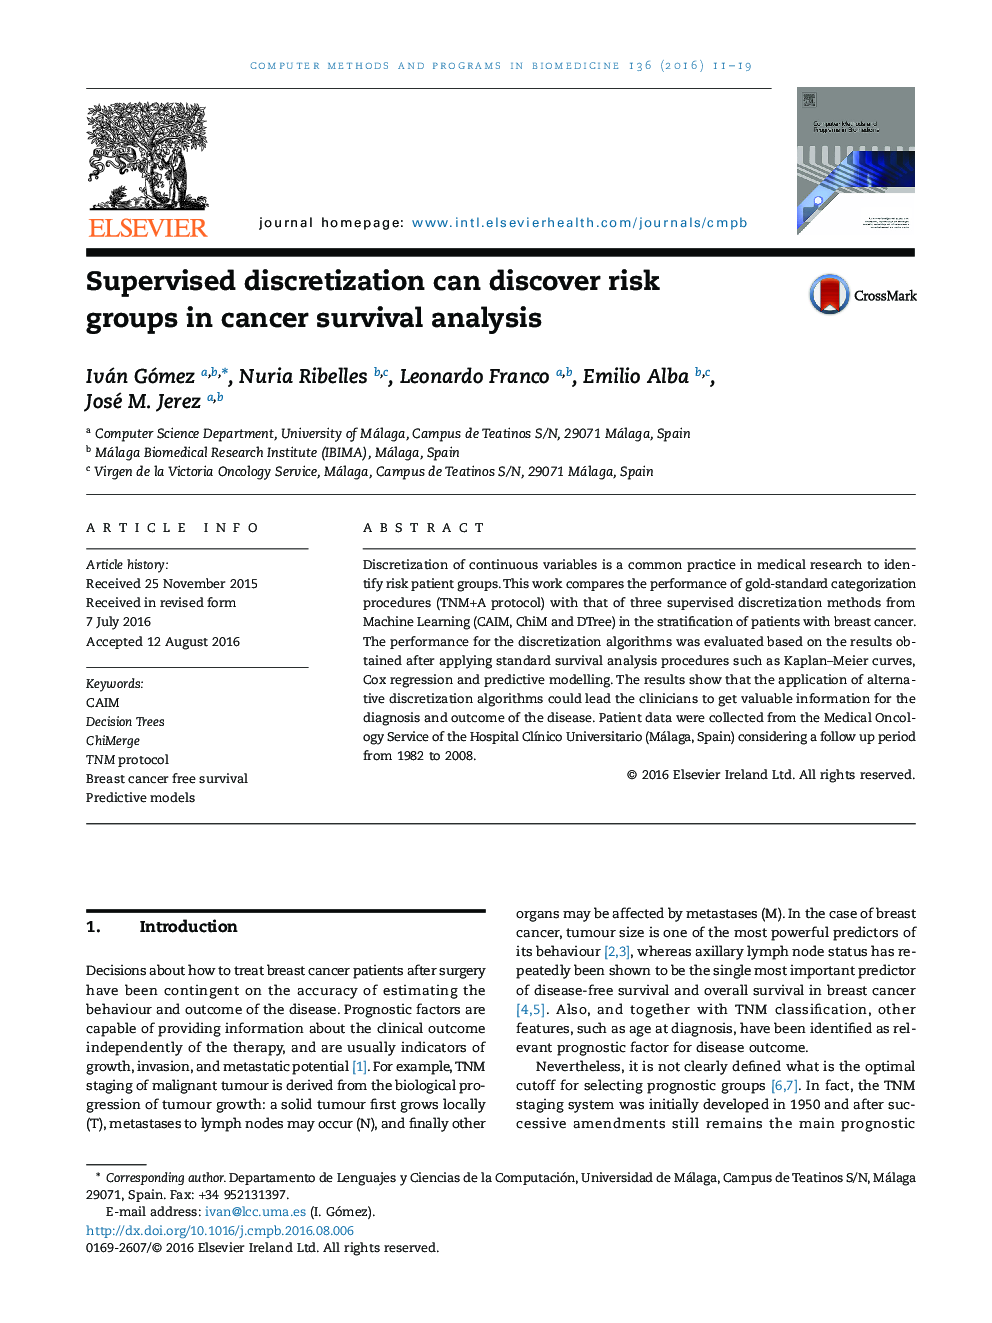 Supervised discretization can discover risk groups in cancer survival analysis